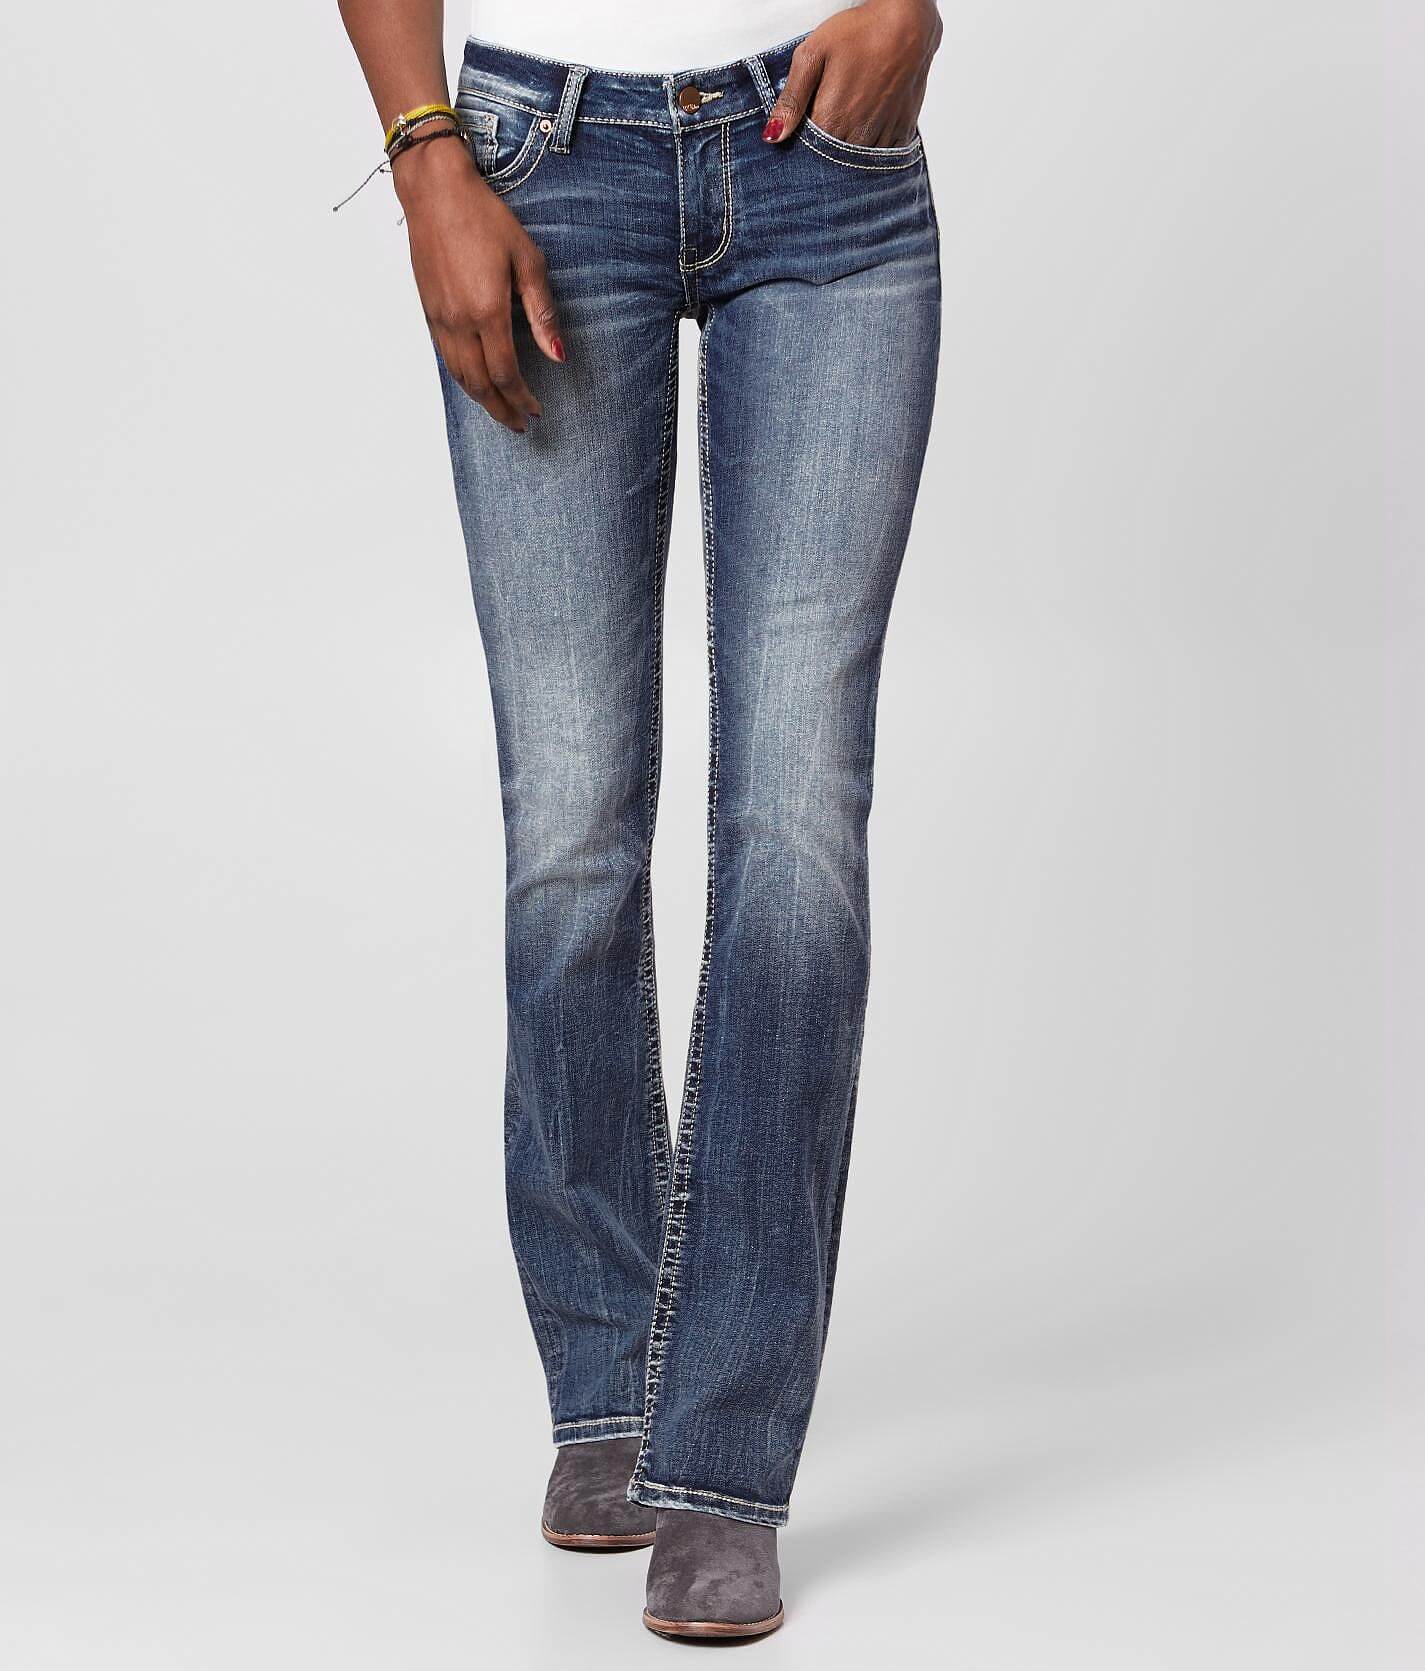 levi's classic relaxed tapered 550 womens